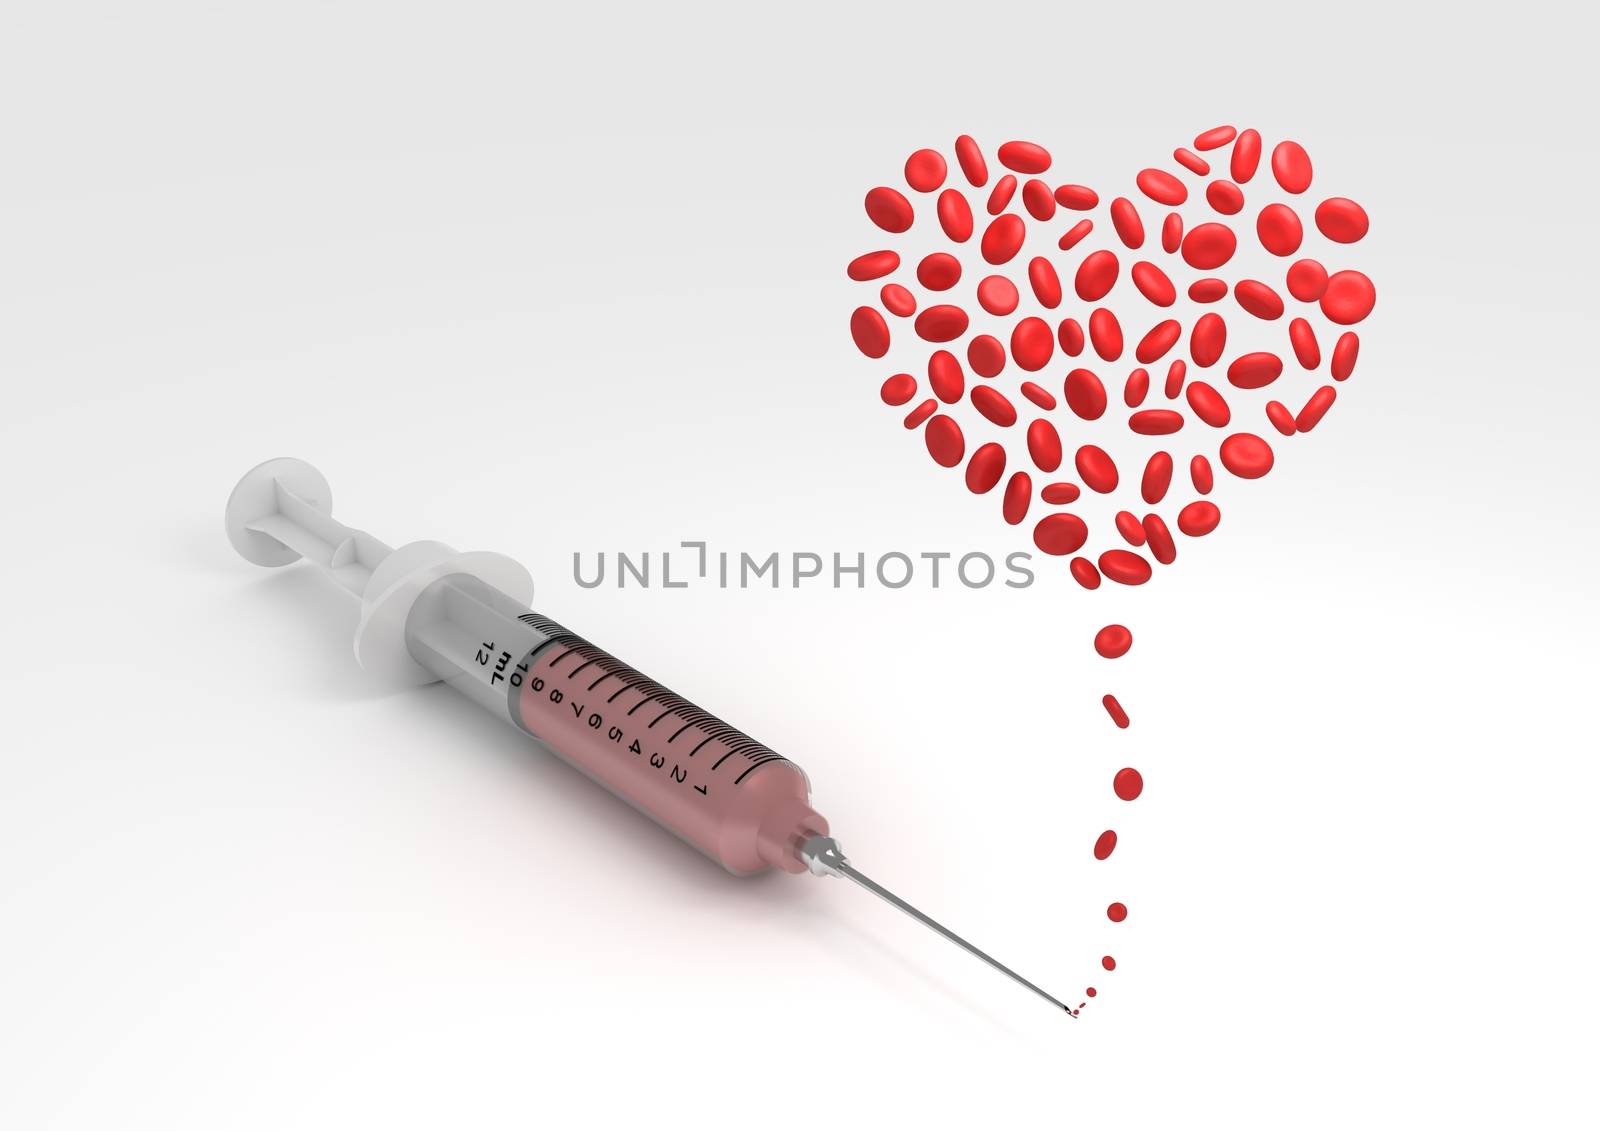 Illustration of a syringe with blood cells forming the shape of a heart